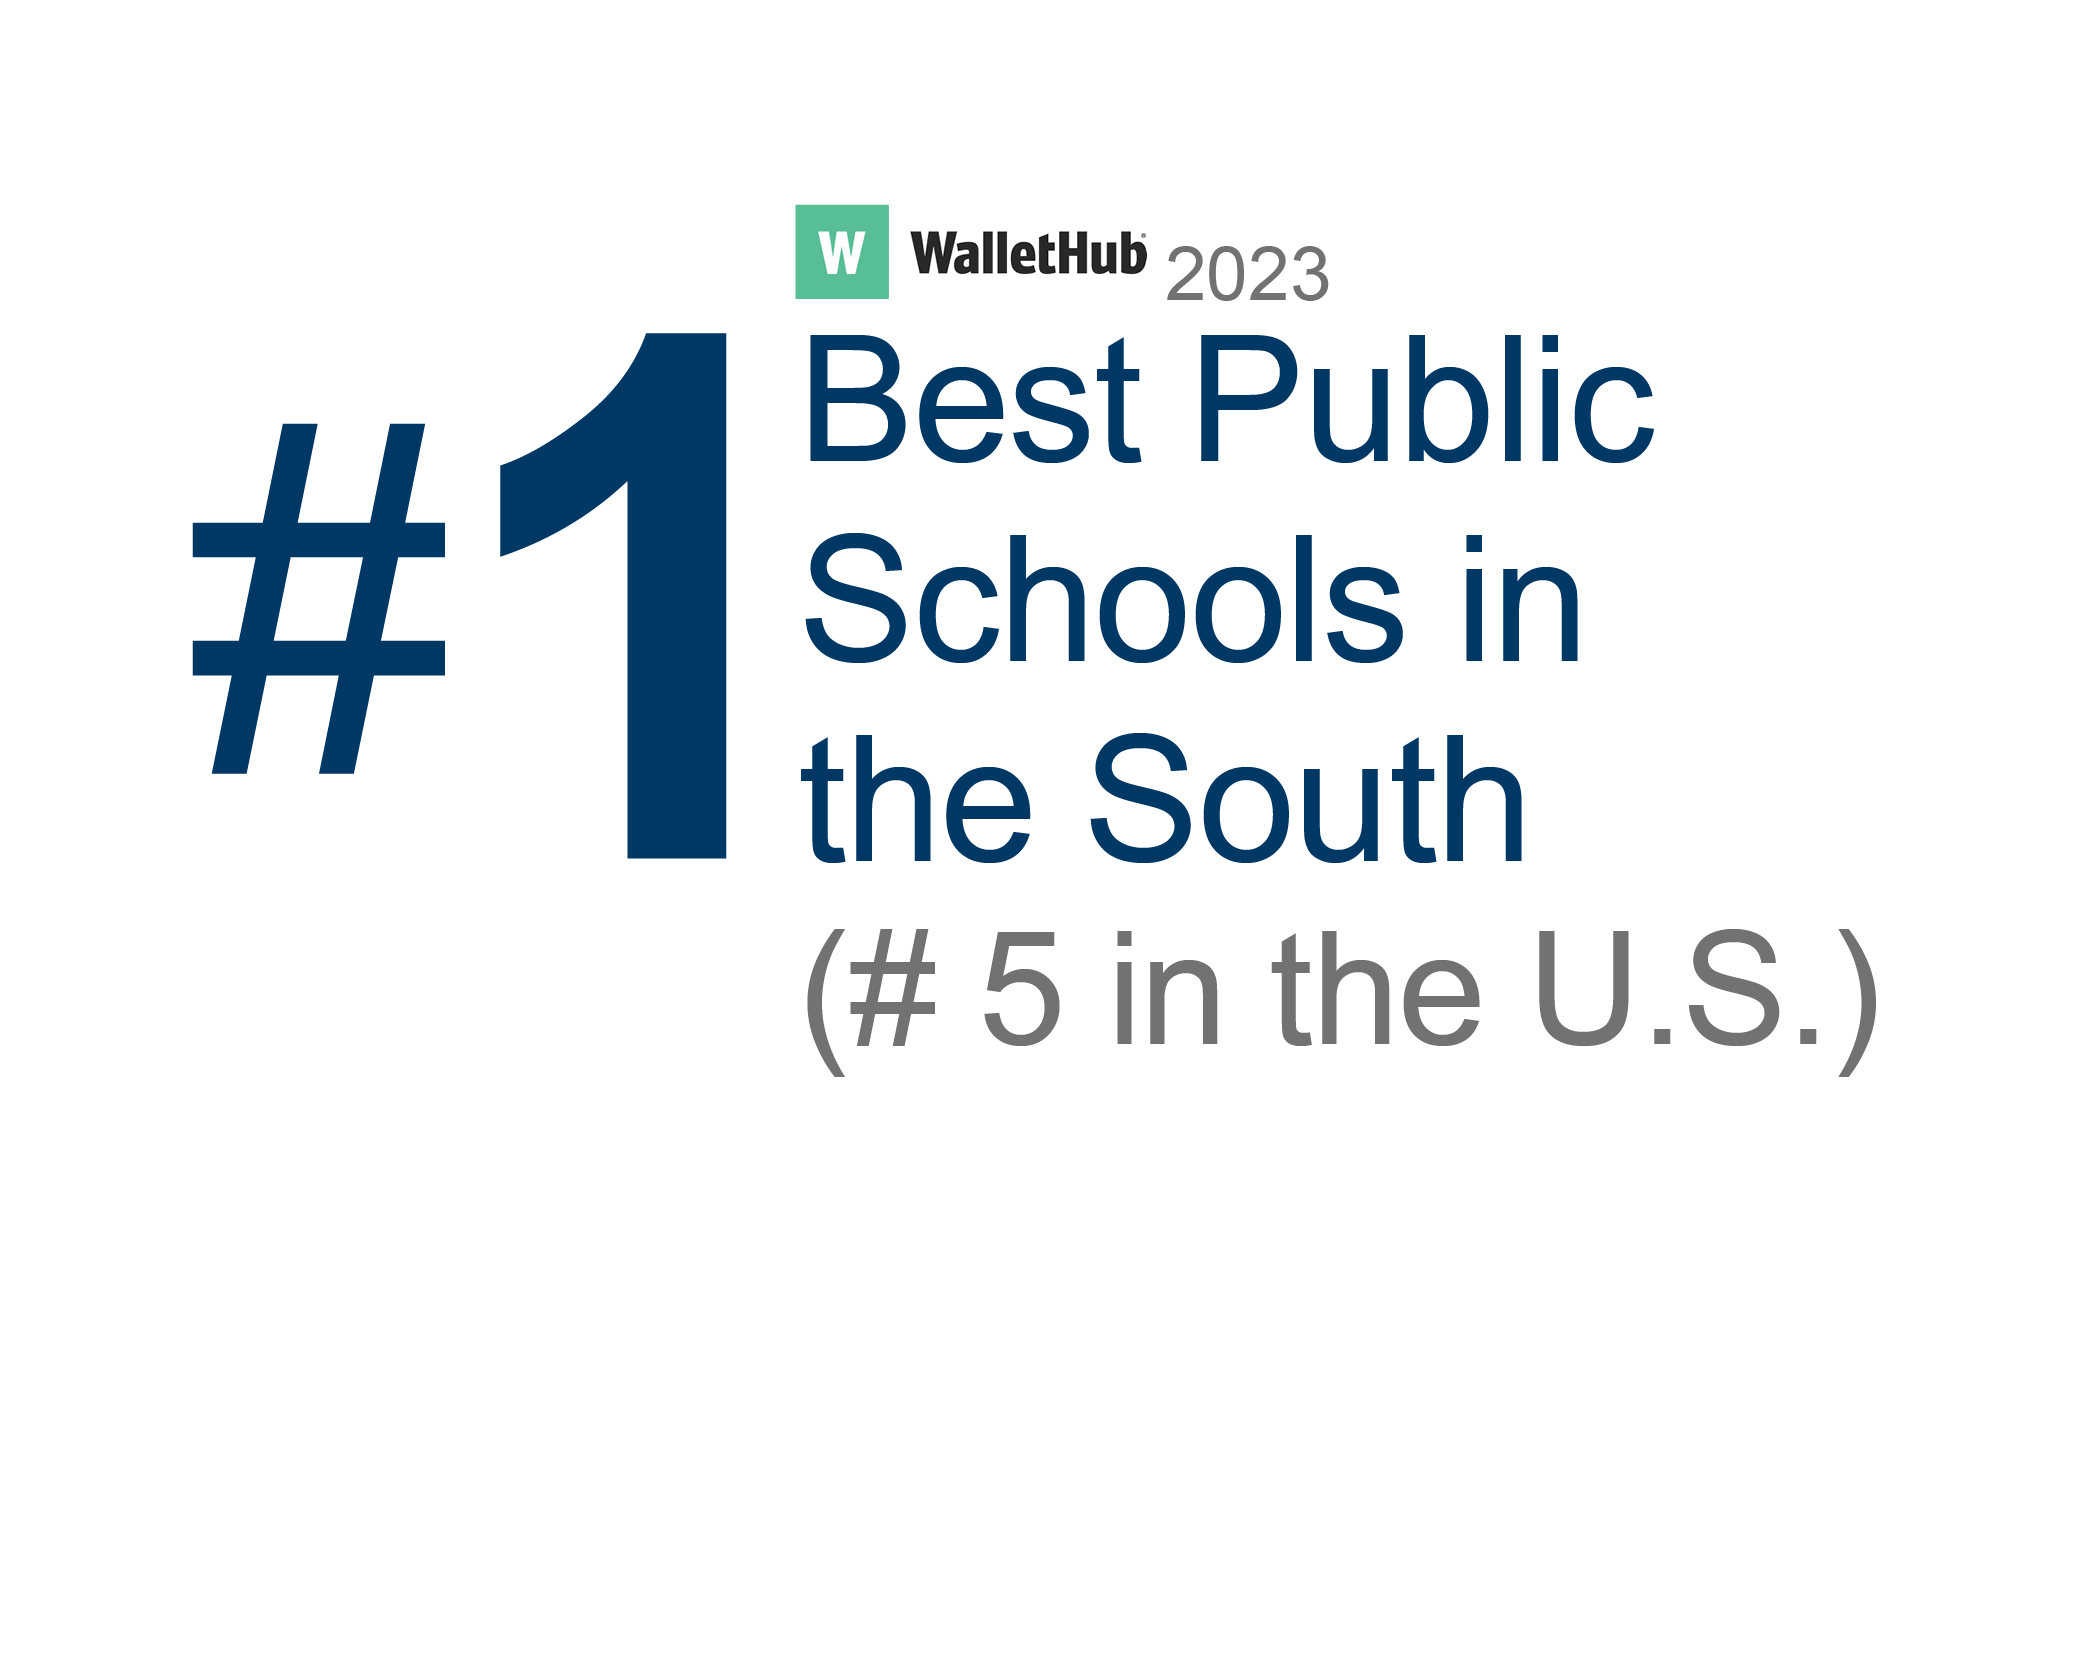 WalletHub_Best Public Schools in the South_2023